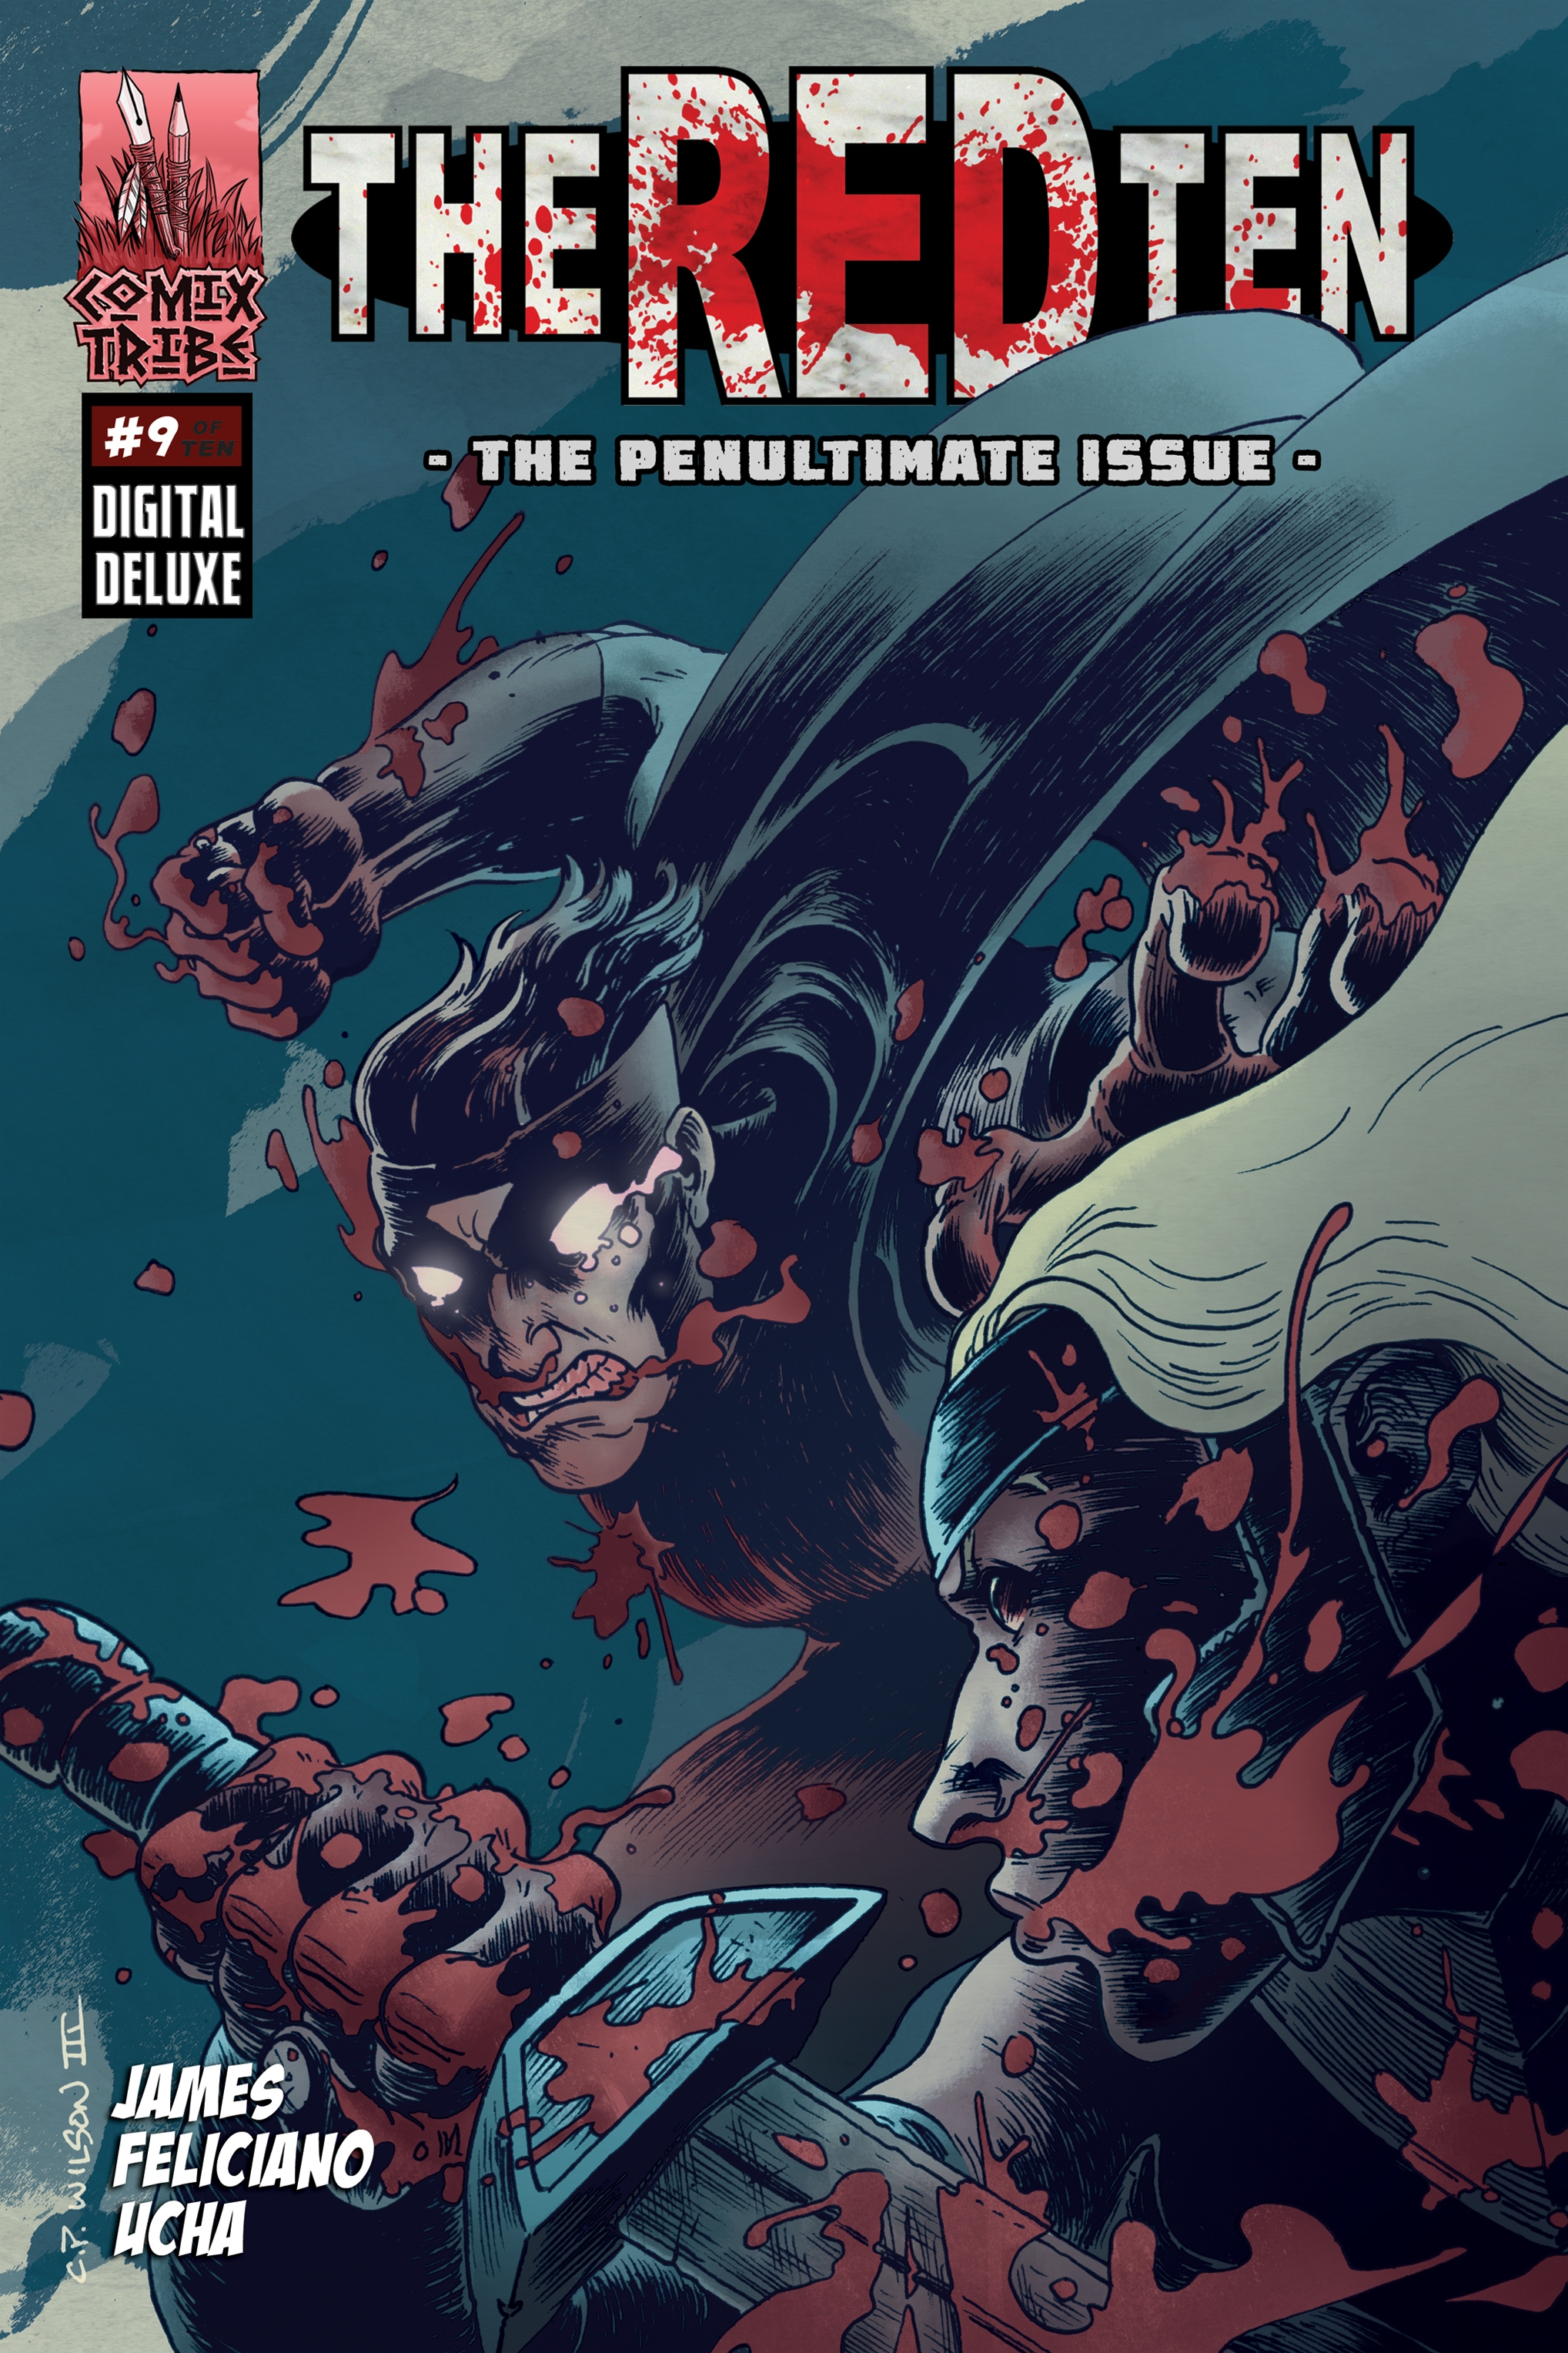 Read online The Red Ten comic -  Issue #9 - 1